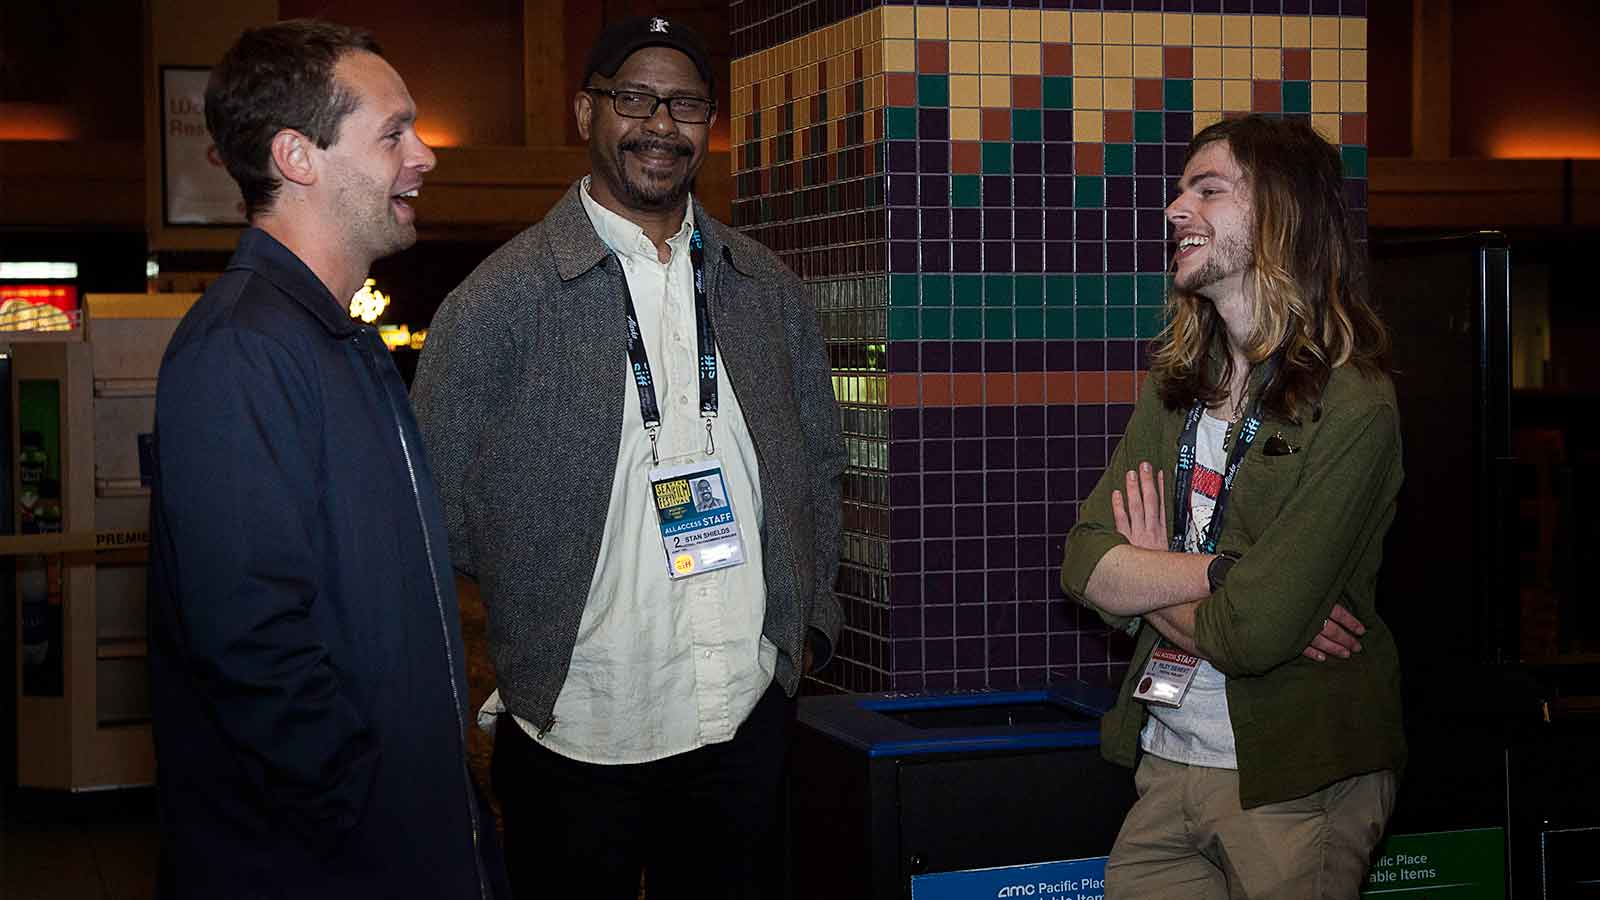 Director Kevan Funk talks with Stan Shields and SIFF staff member